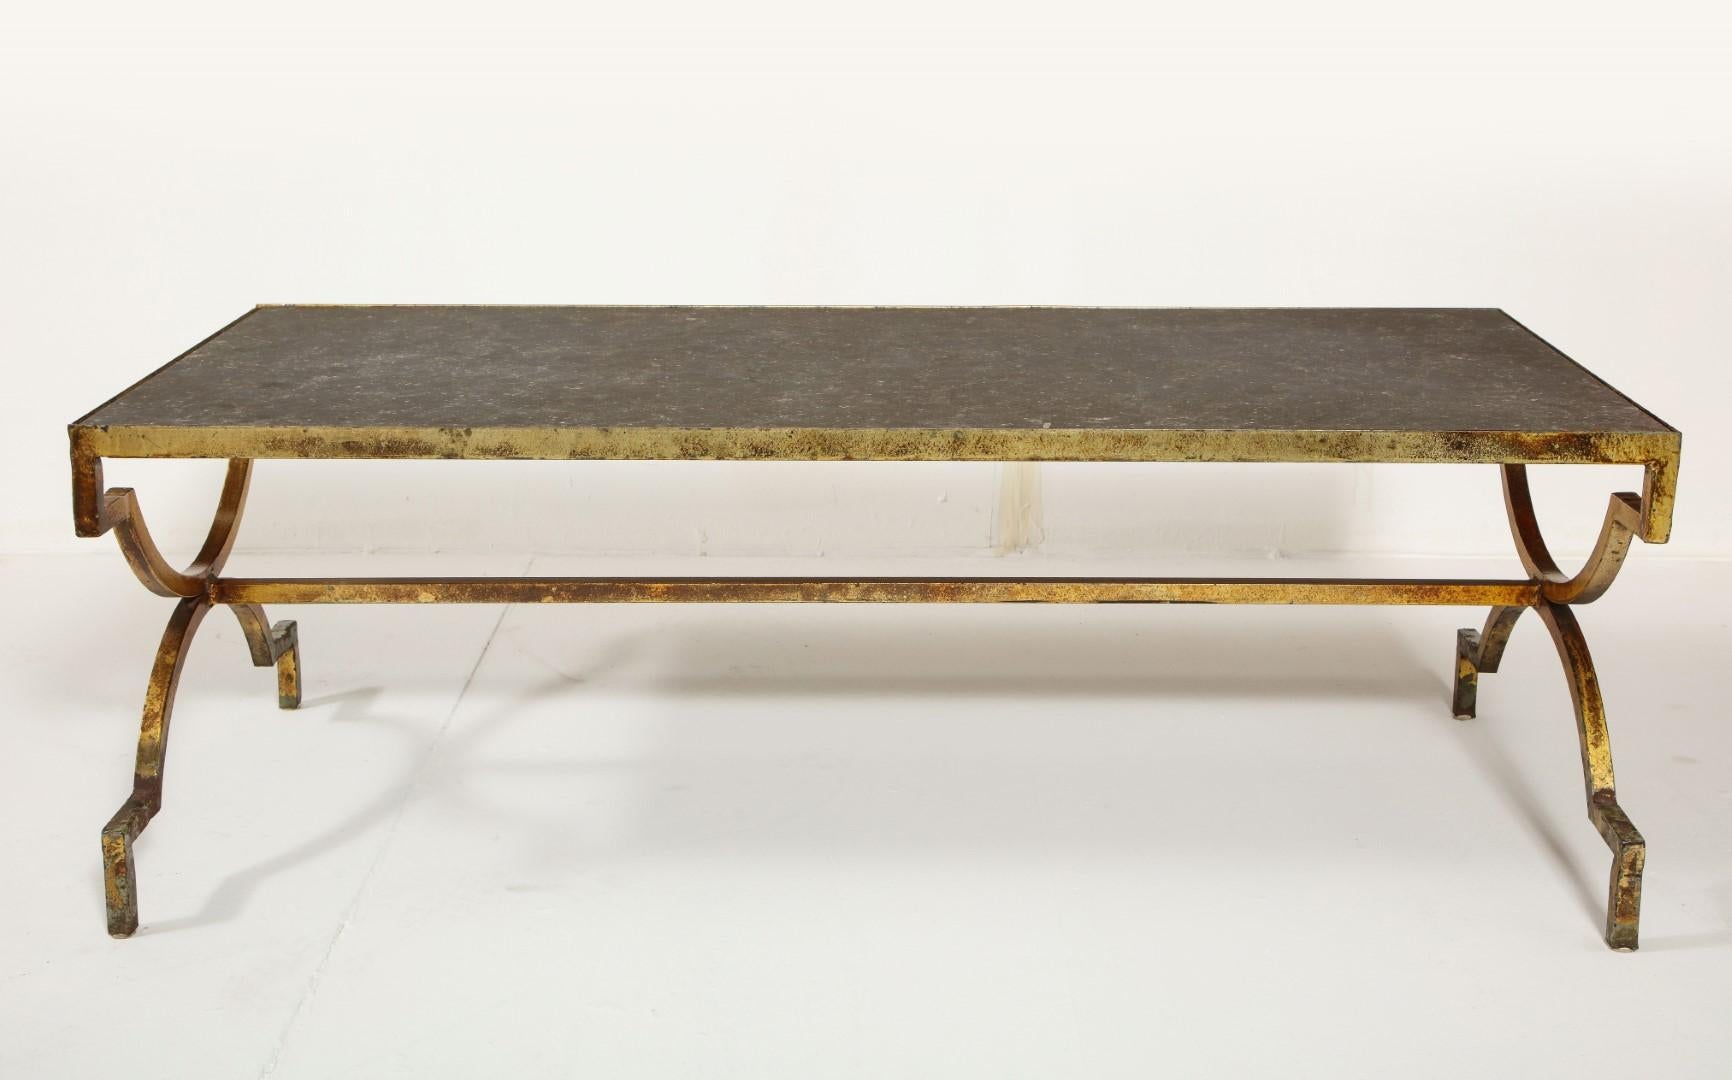 Midcentury French coffee table with gilded iron base and custom limestone top, circa 1940s.